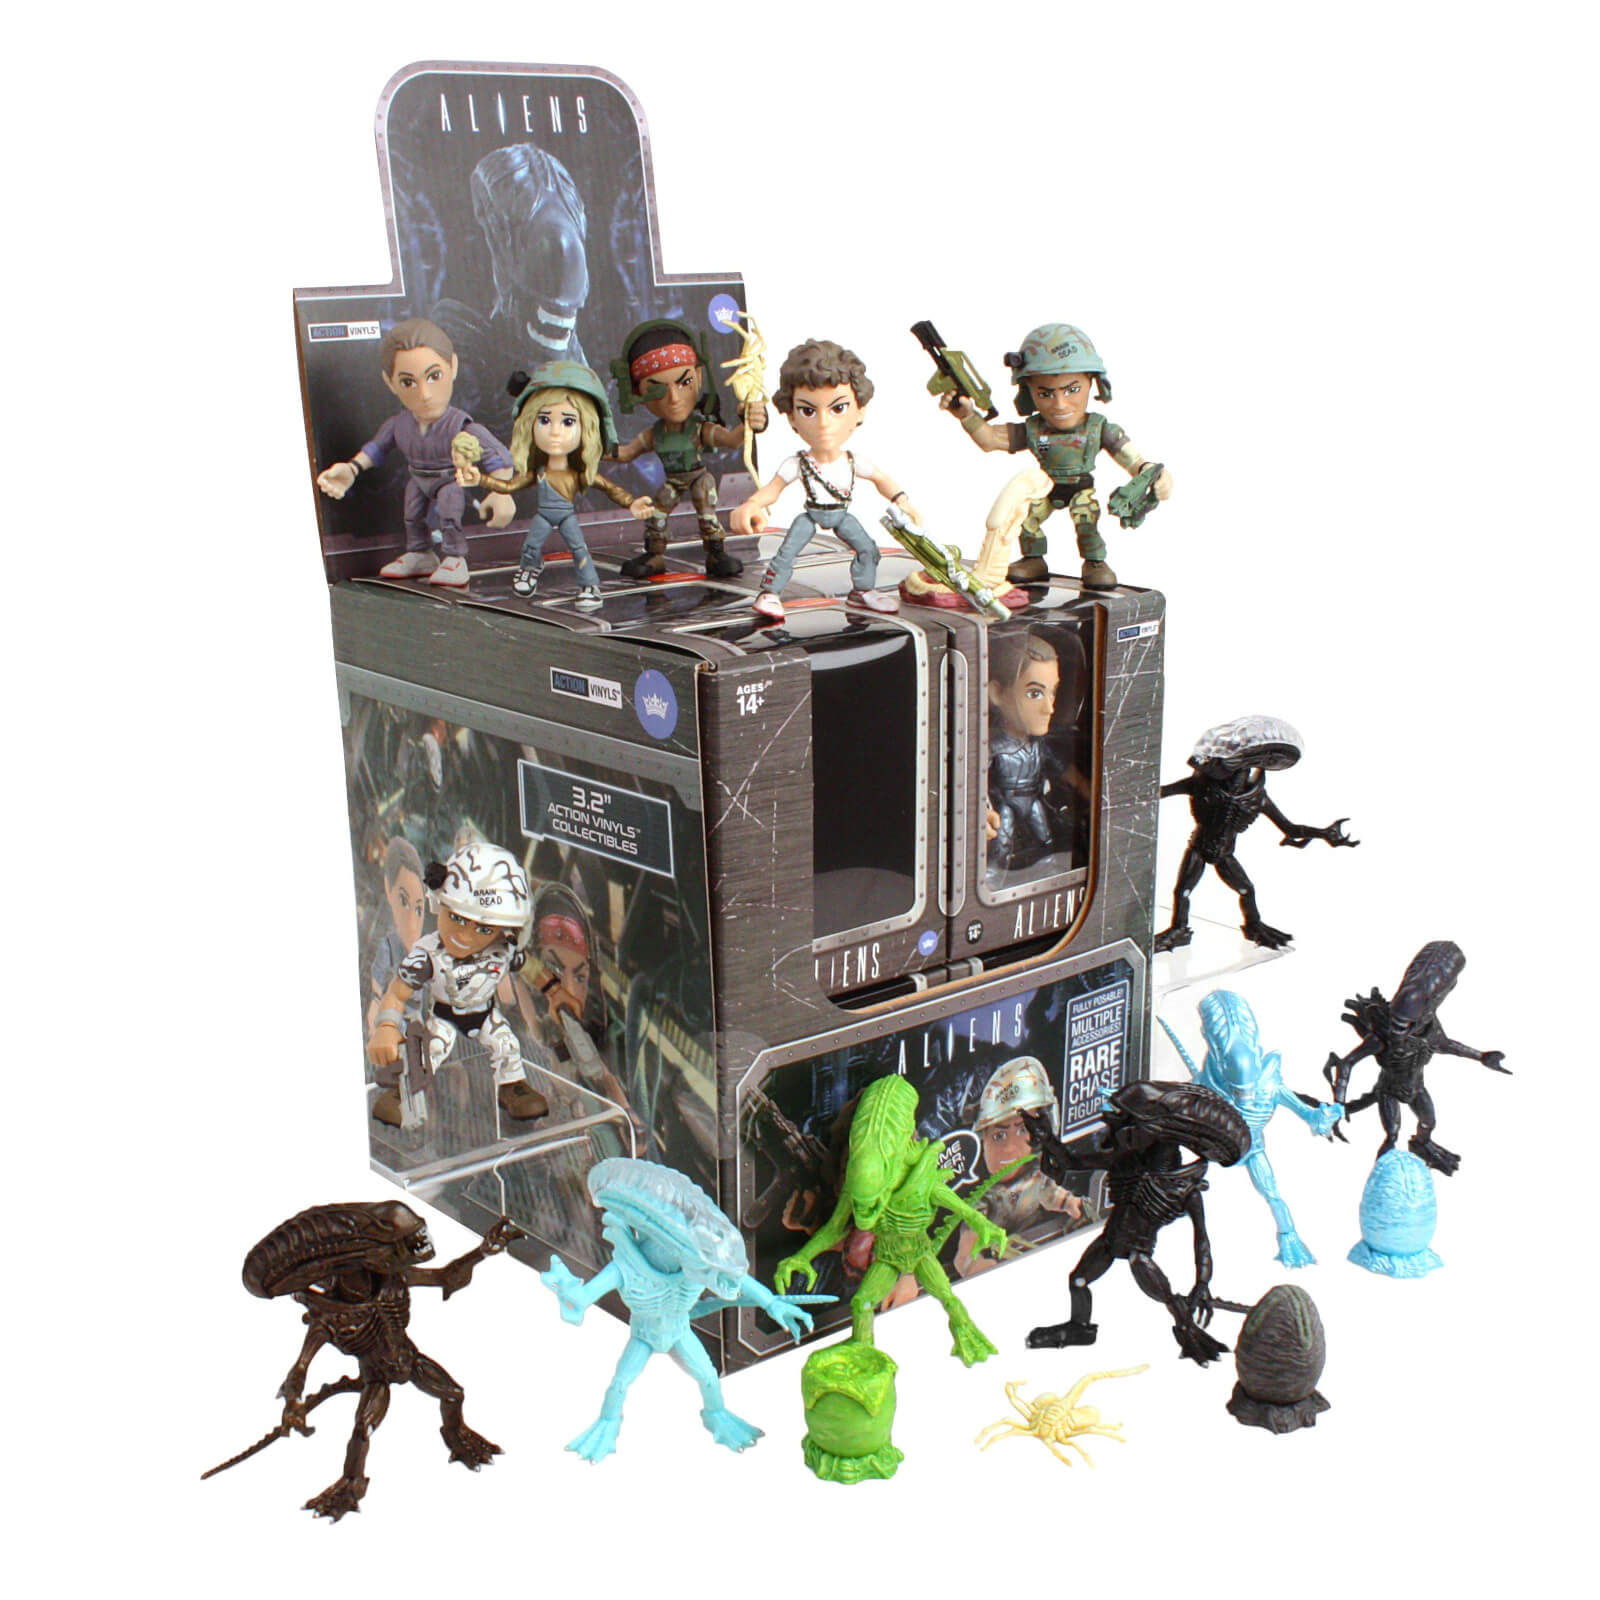 The Loyal Subjects Aliens Figures - Assortment